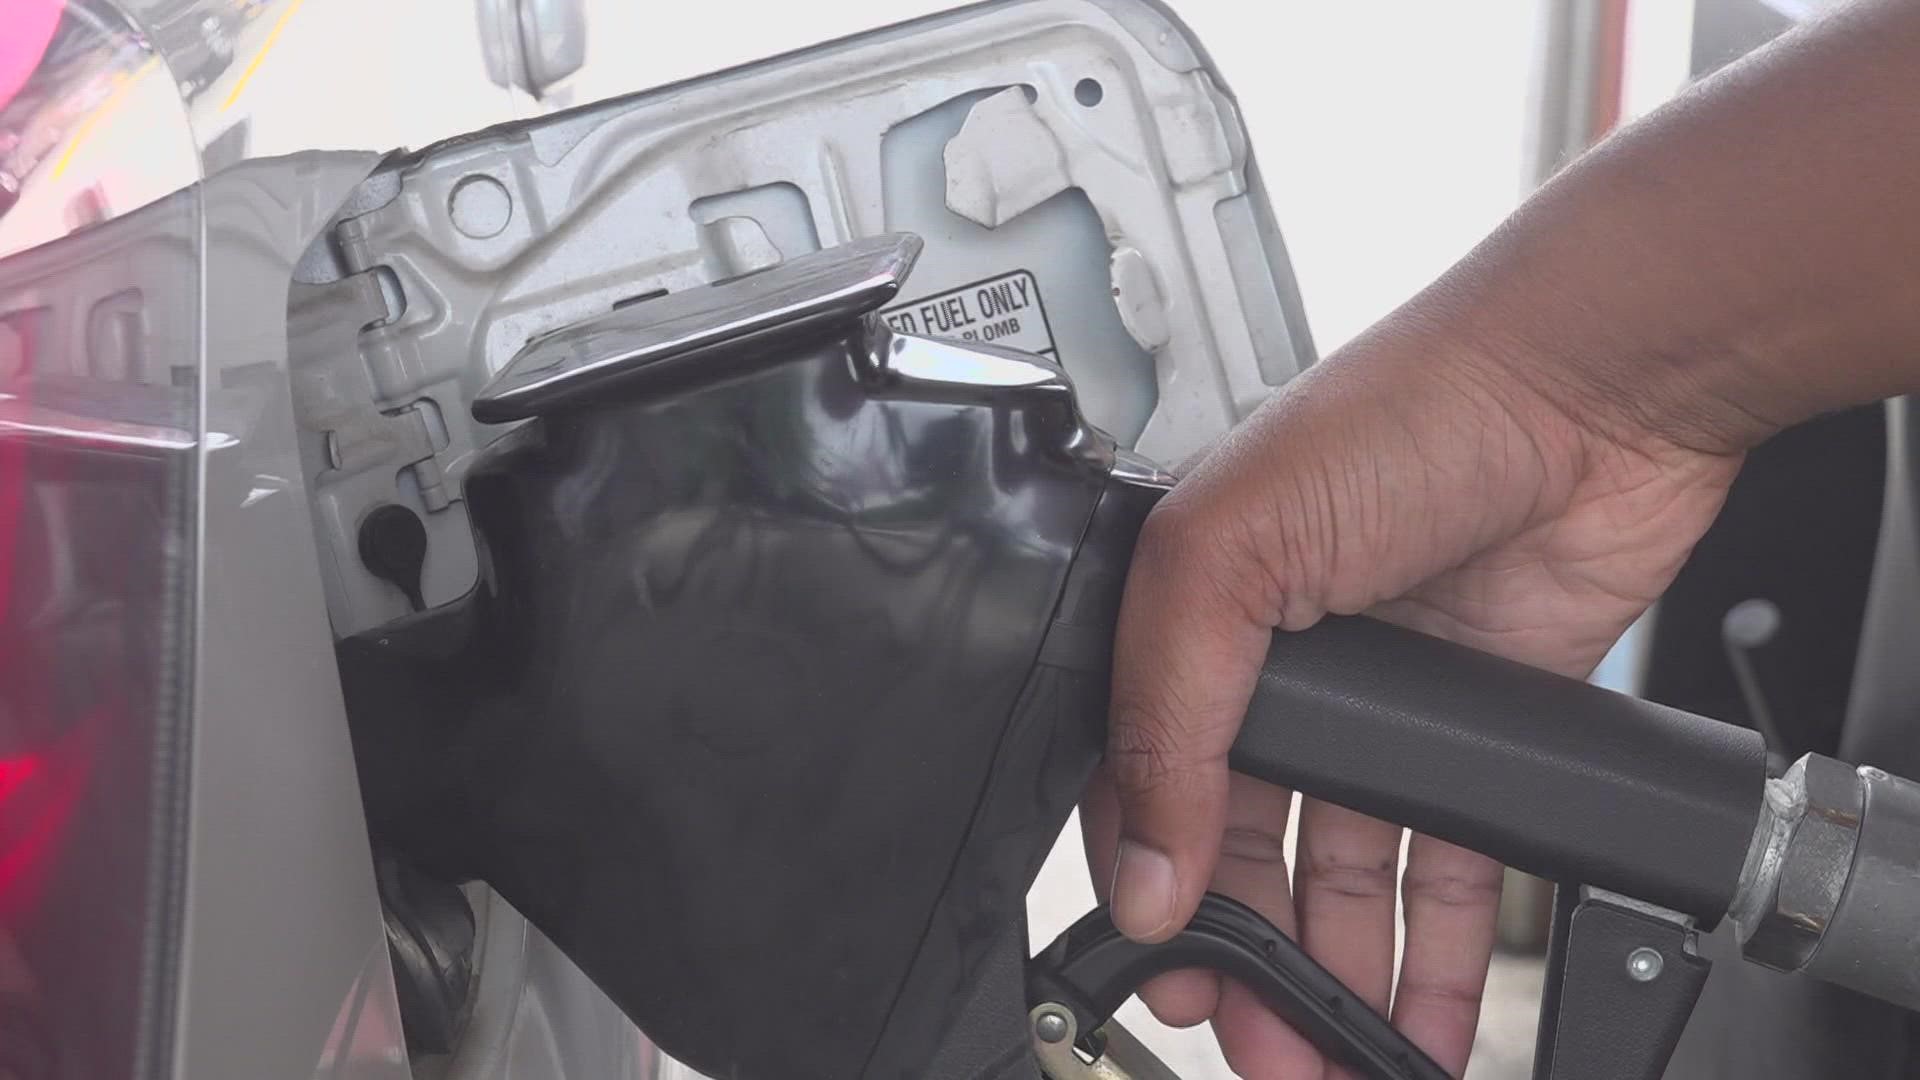 AAA says the current national average gas price is $3.92 a gallon.